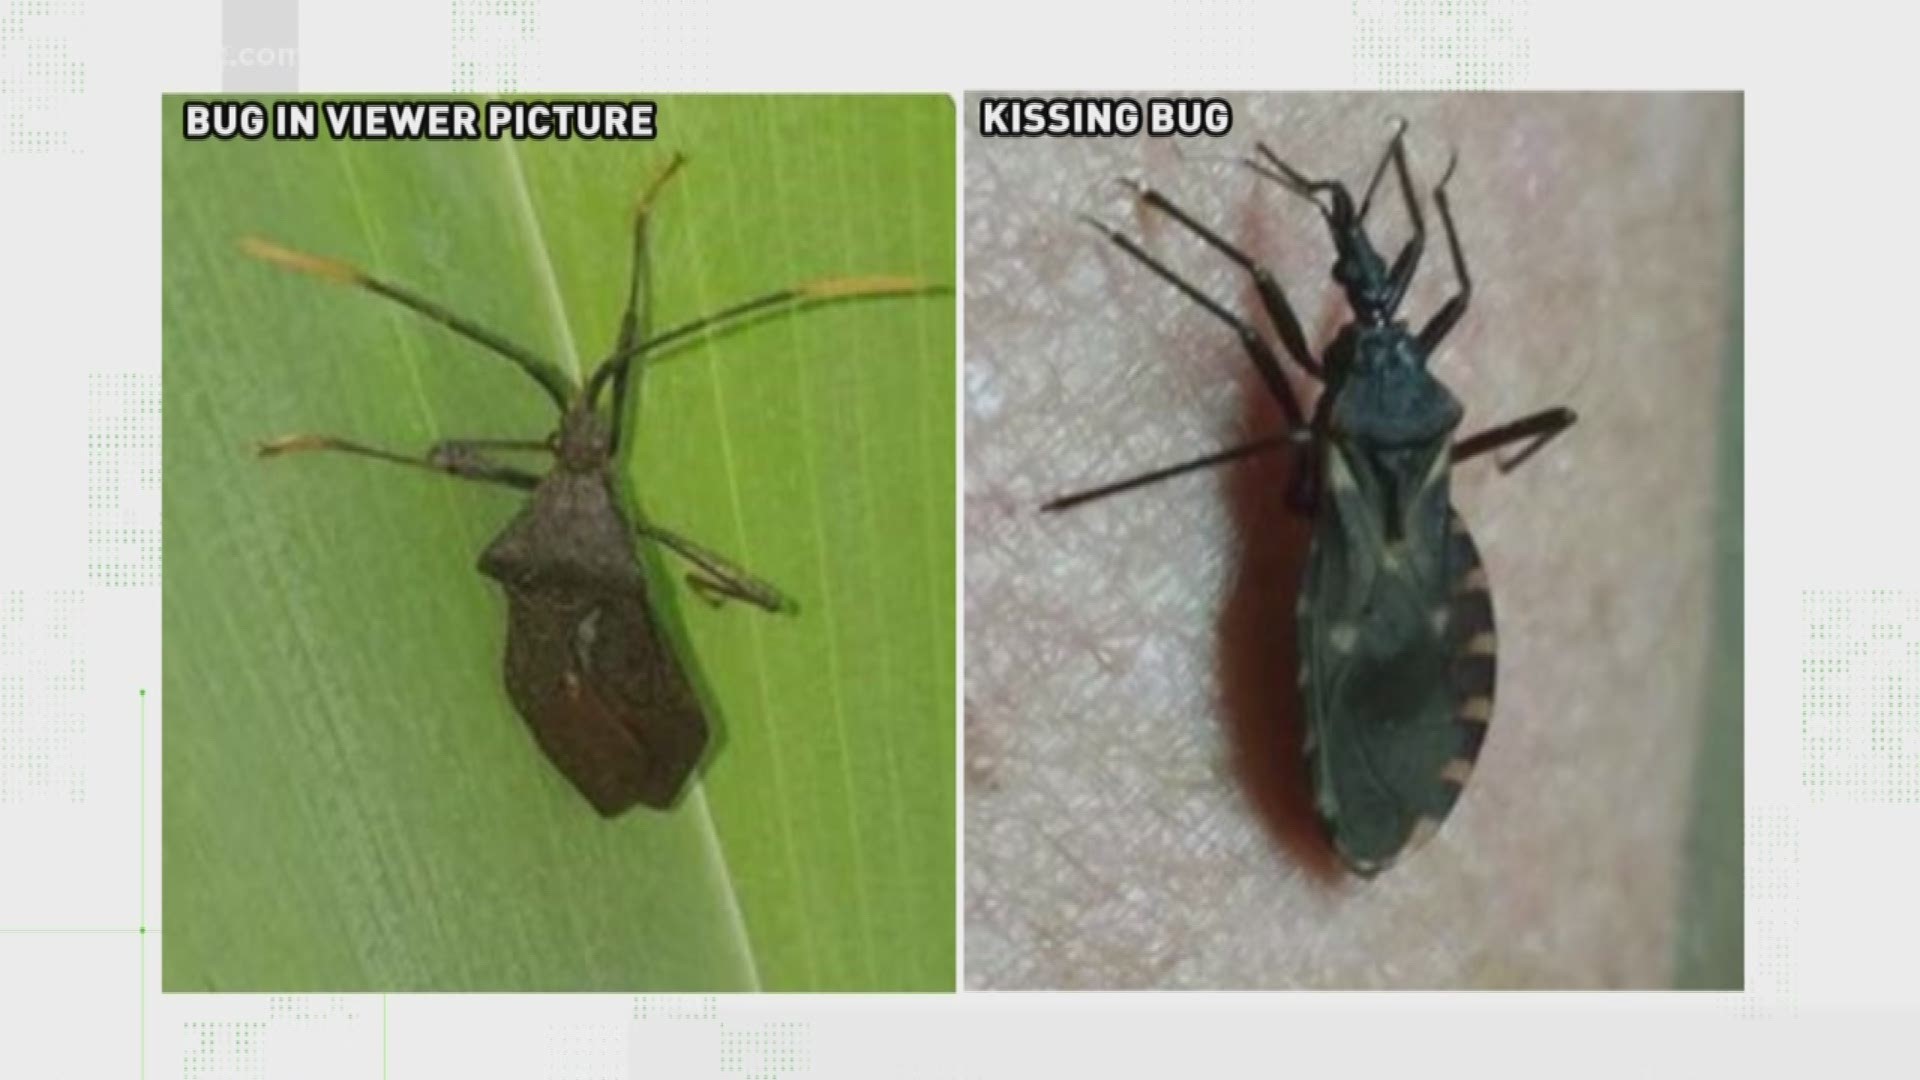 You ask; we VERIFY. A Triad viewer spotted this creature on her door and wanted to know if it is a kissing bug, which is linked to a deadly disease.